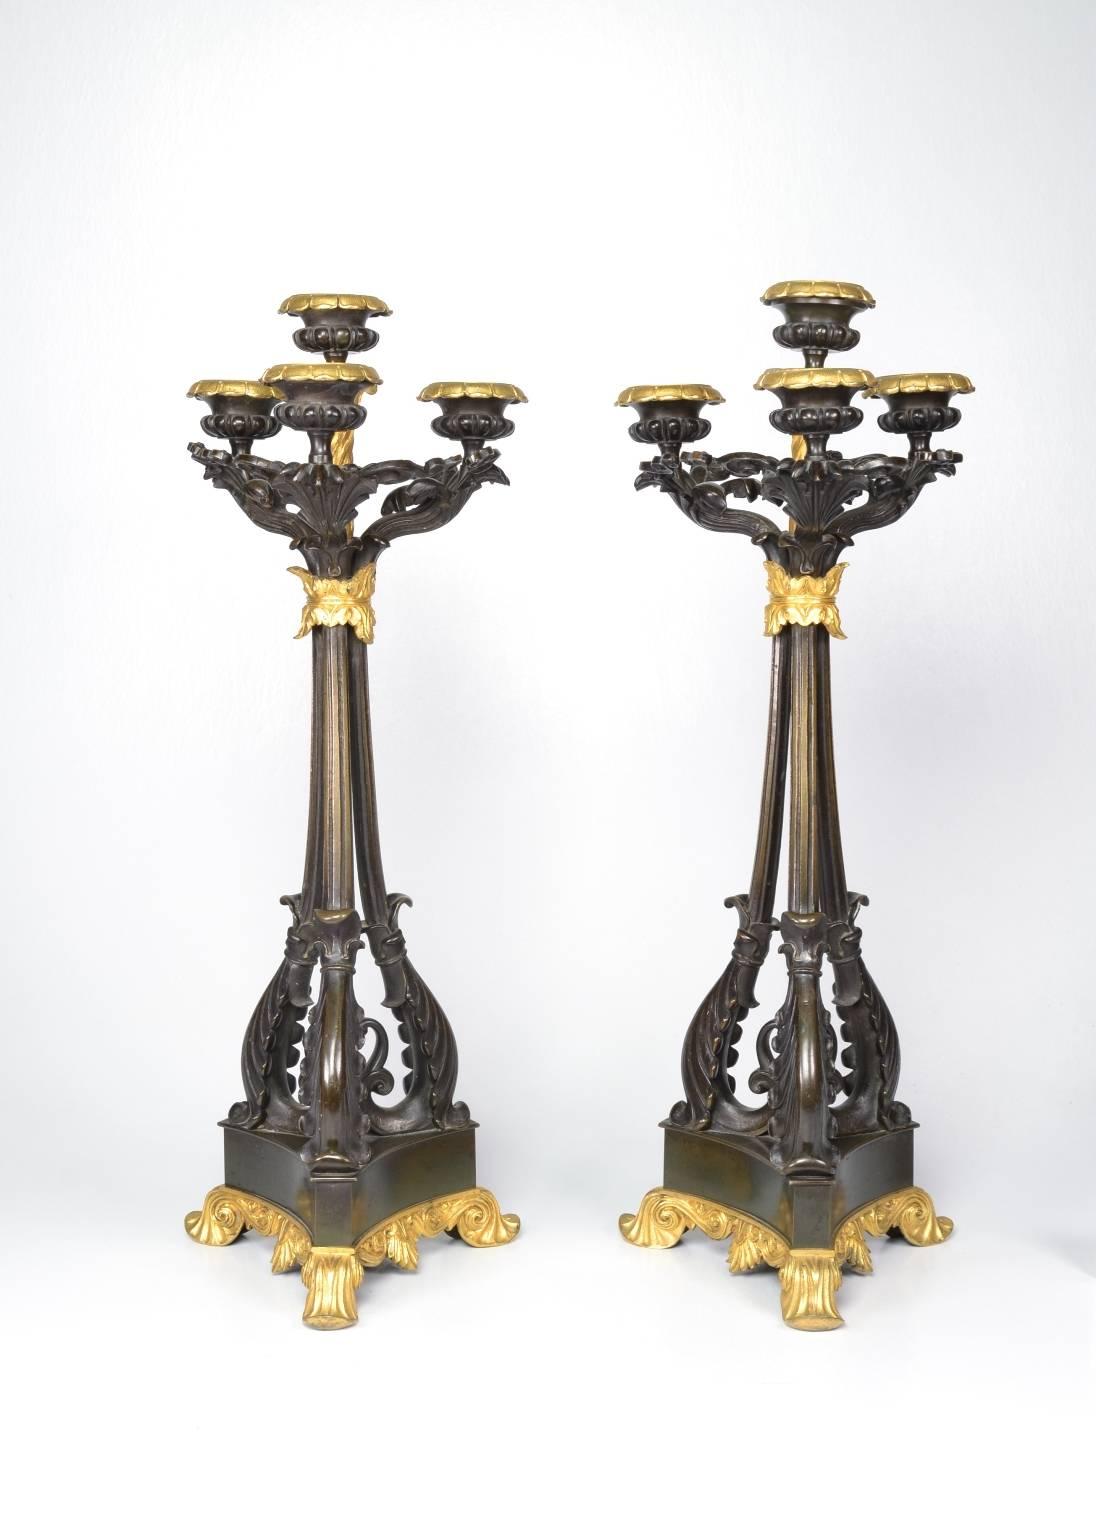 Pair of bronze and ormolu (bronze doré) four-light candlesticks, each with gold floral bobeches and leafy arms raised on three scrolling branches bundled at the top; the triangular base raised on doré feet.

These unusual candelabra are well cast